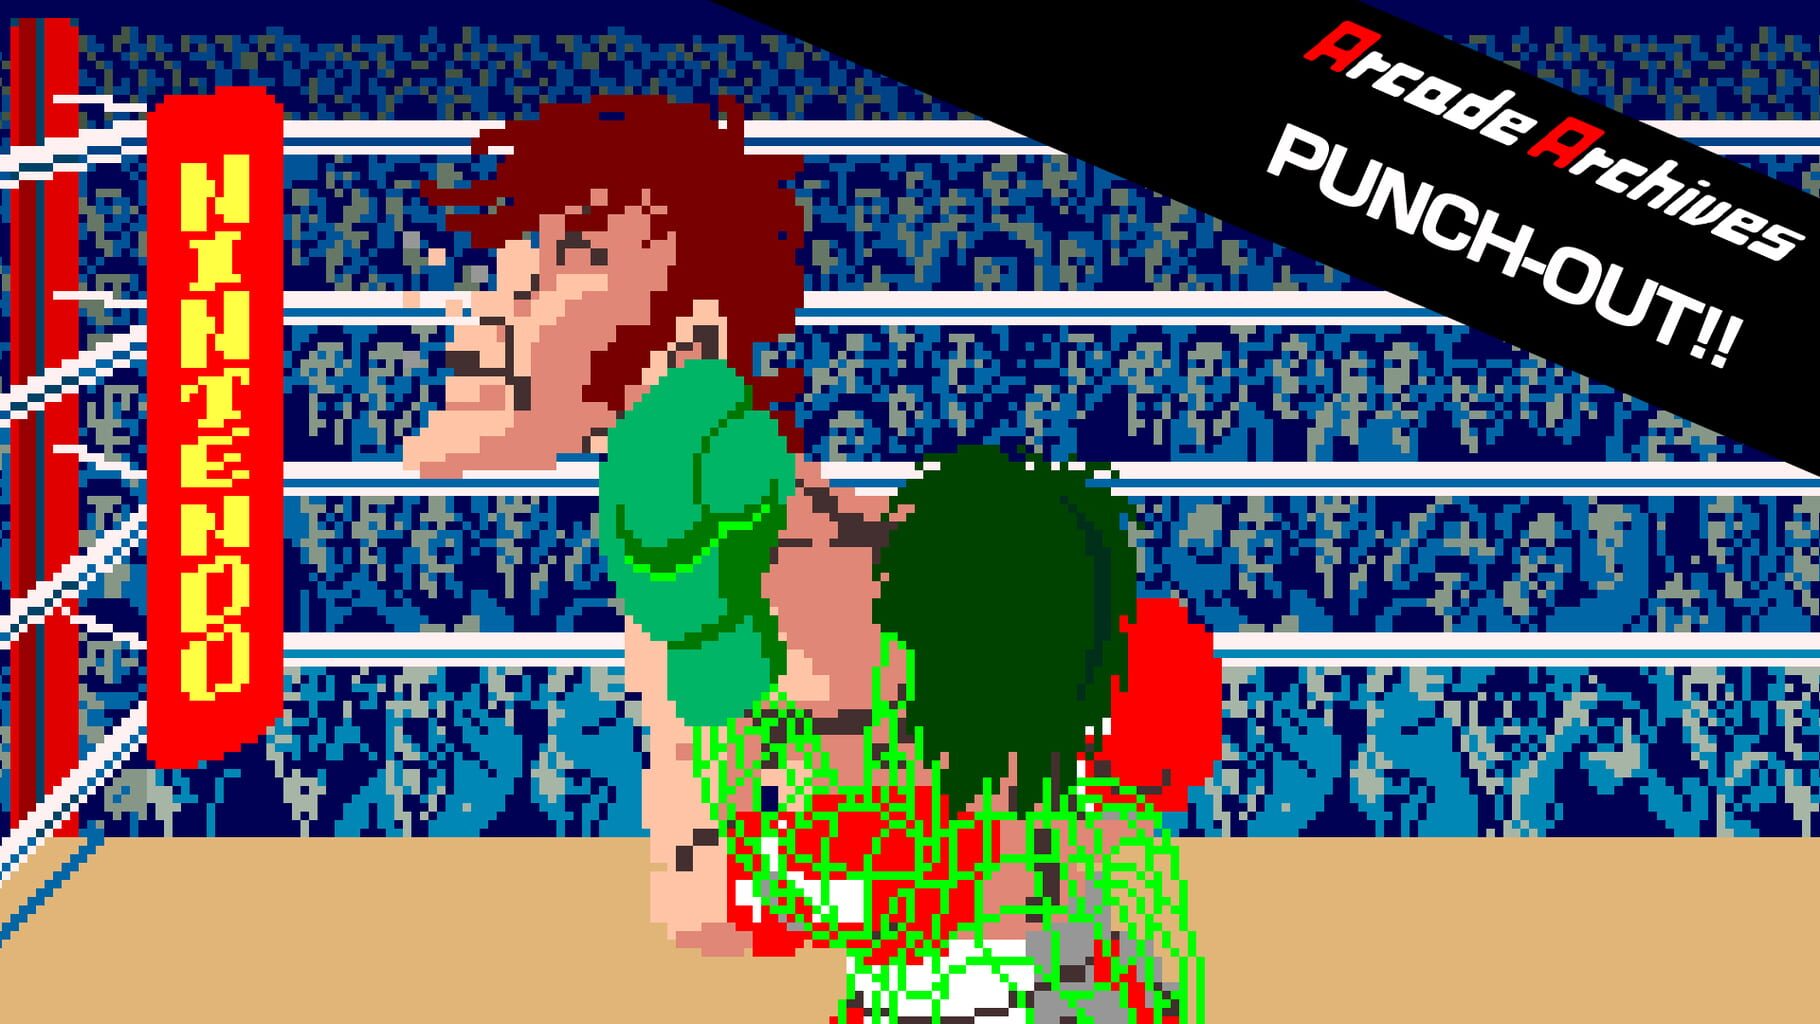 Arcade Archives: Punch-Out!! artwork